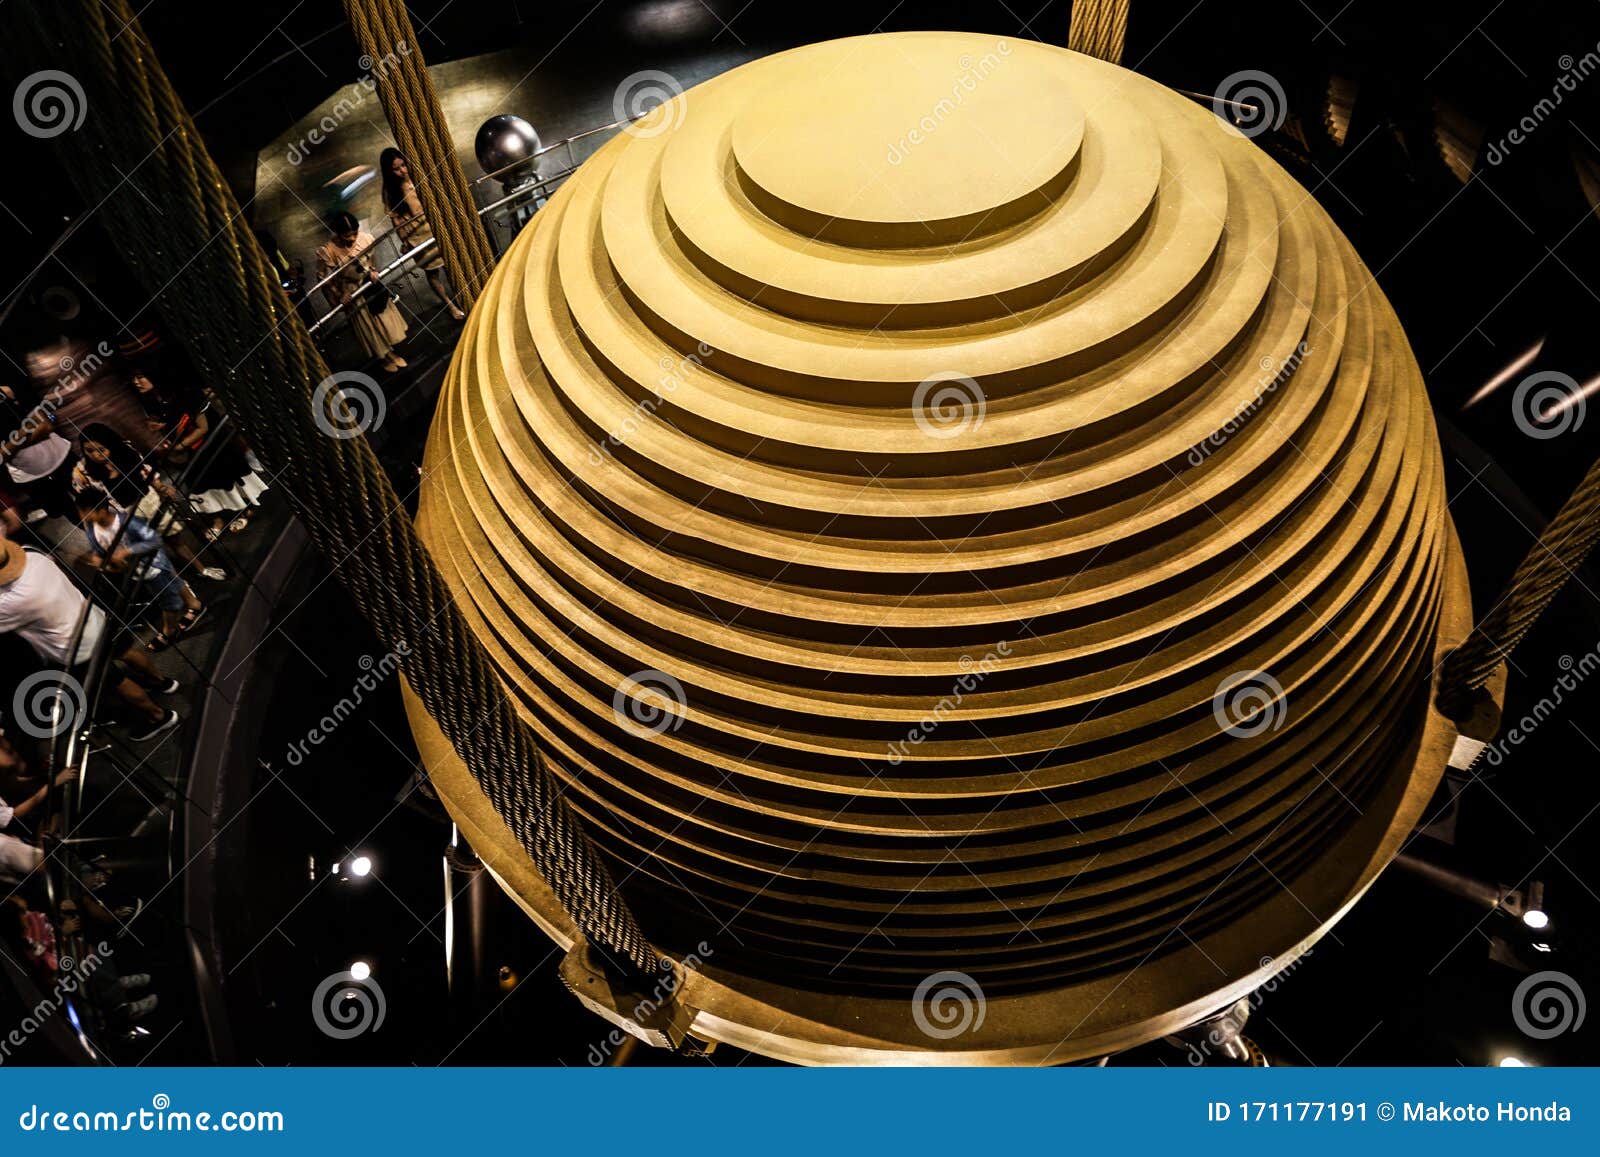 Taipei 101 Tuned Mass Damper Stock Image - Image of attractions, site ...